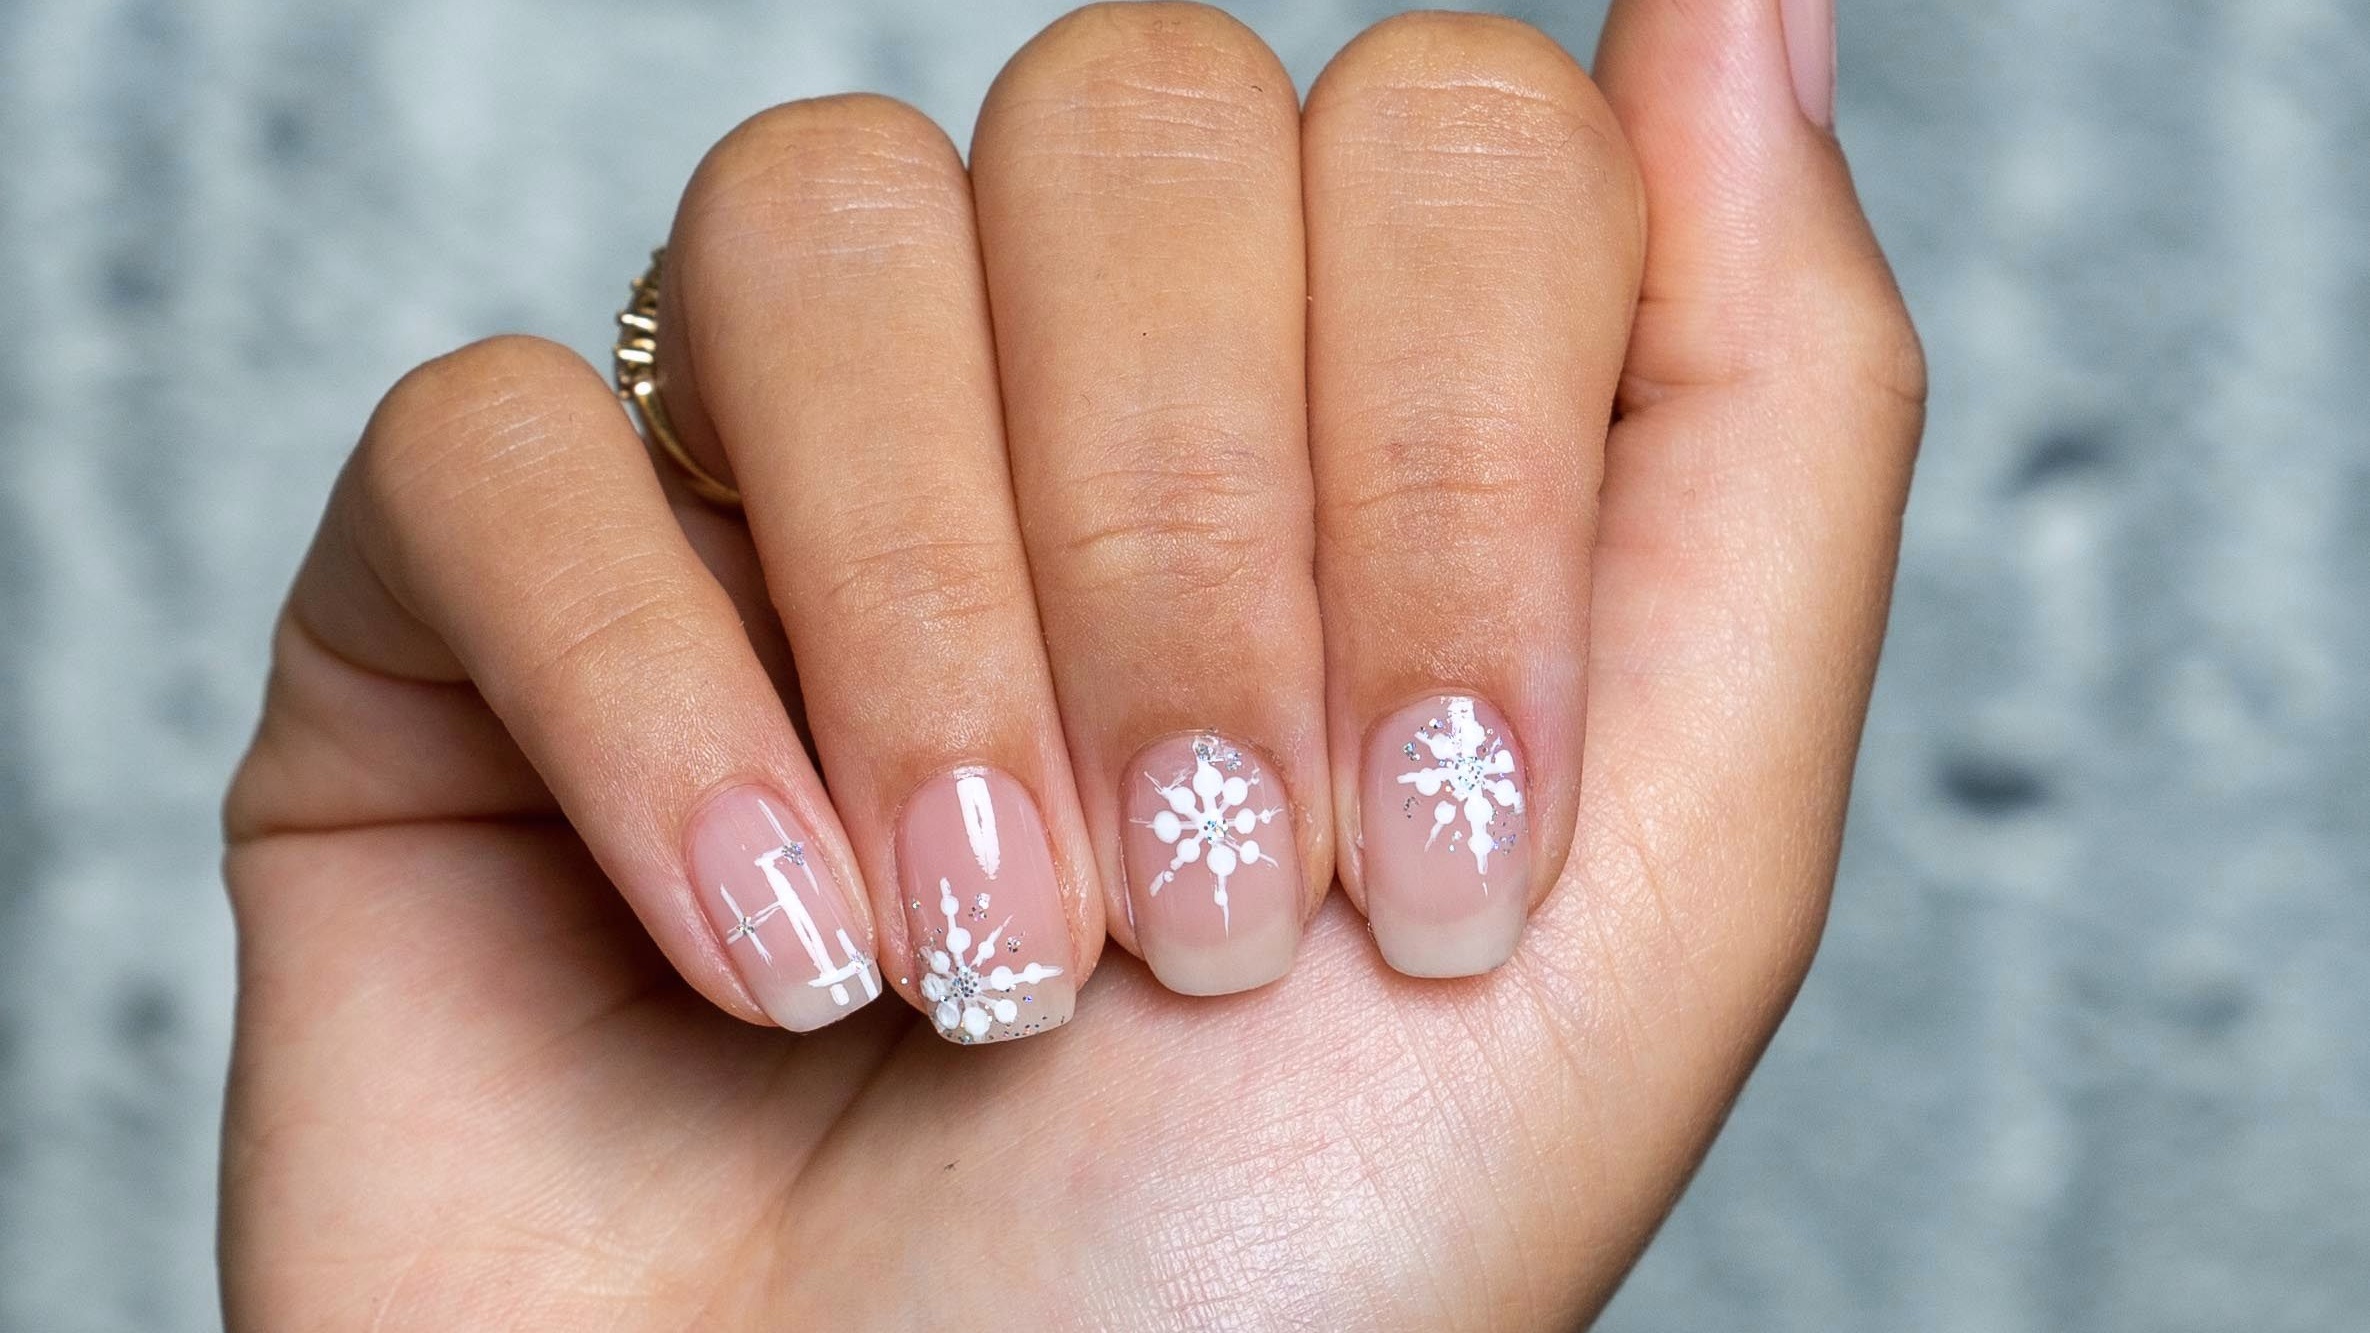 nude with snowflake design by bellacures nail artists